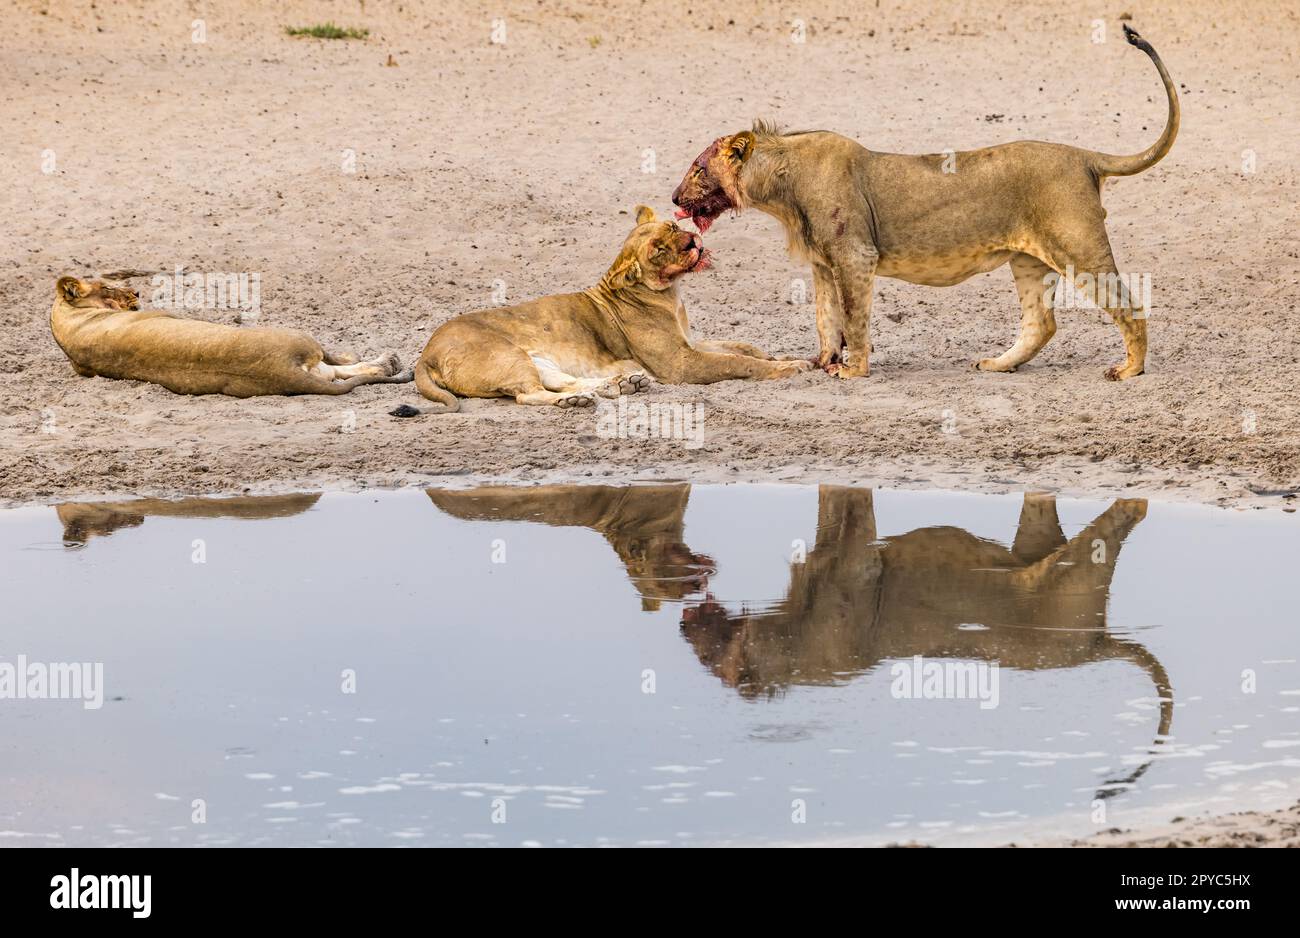 A female lion licking the face of her juvenile male offspring after a kill at a waterhole, Kalahari Desert, Botswana, Africa Stock Photo